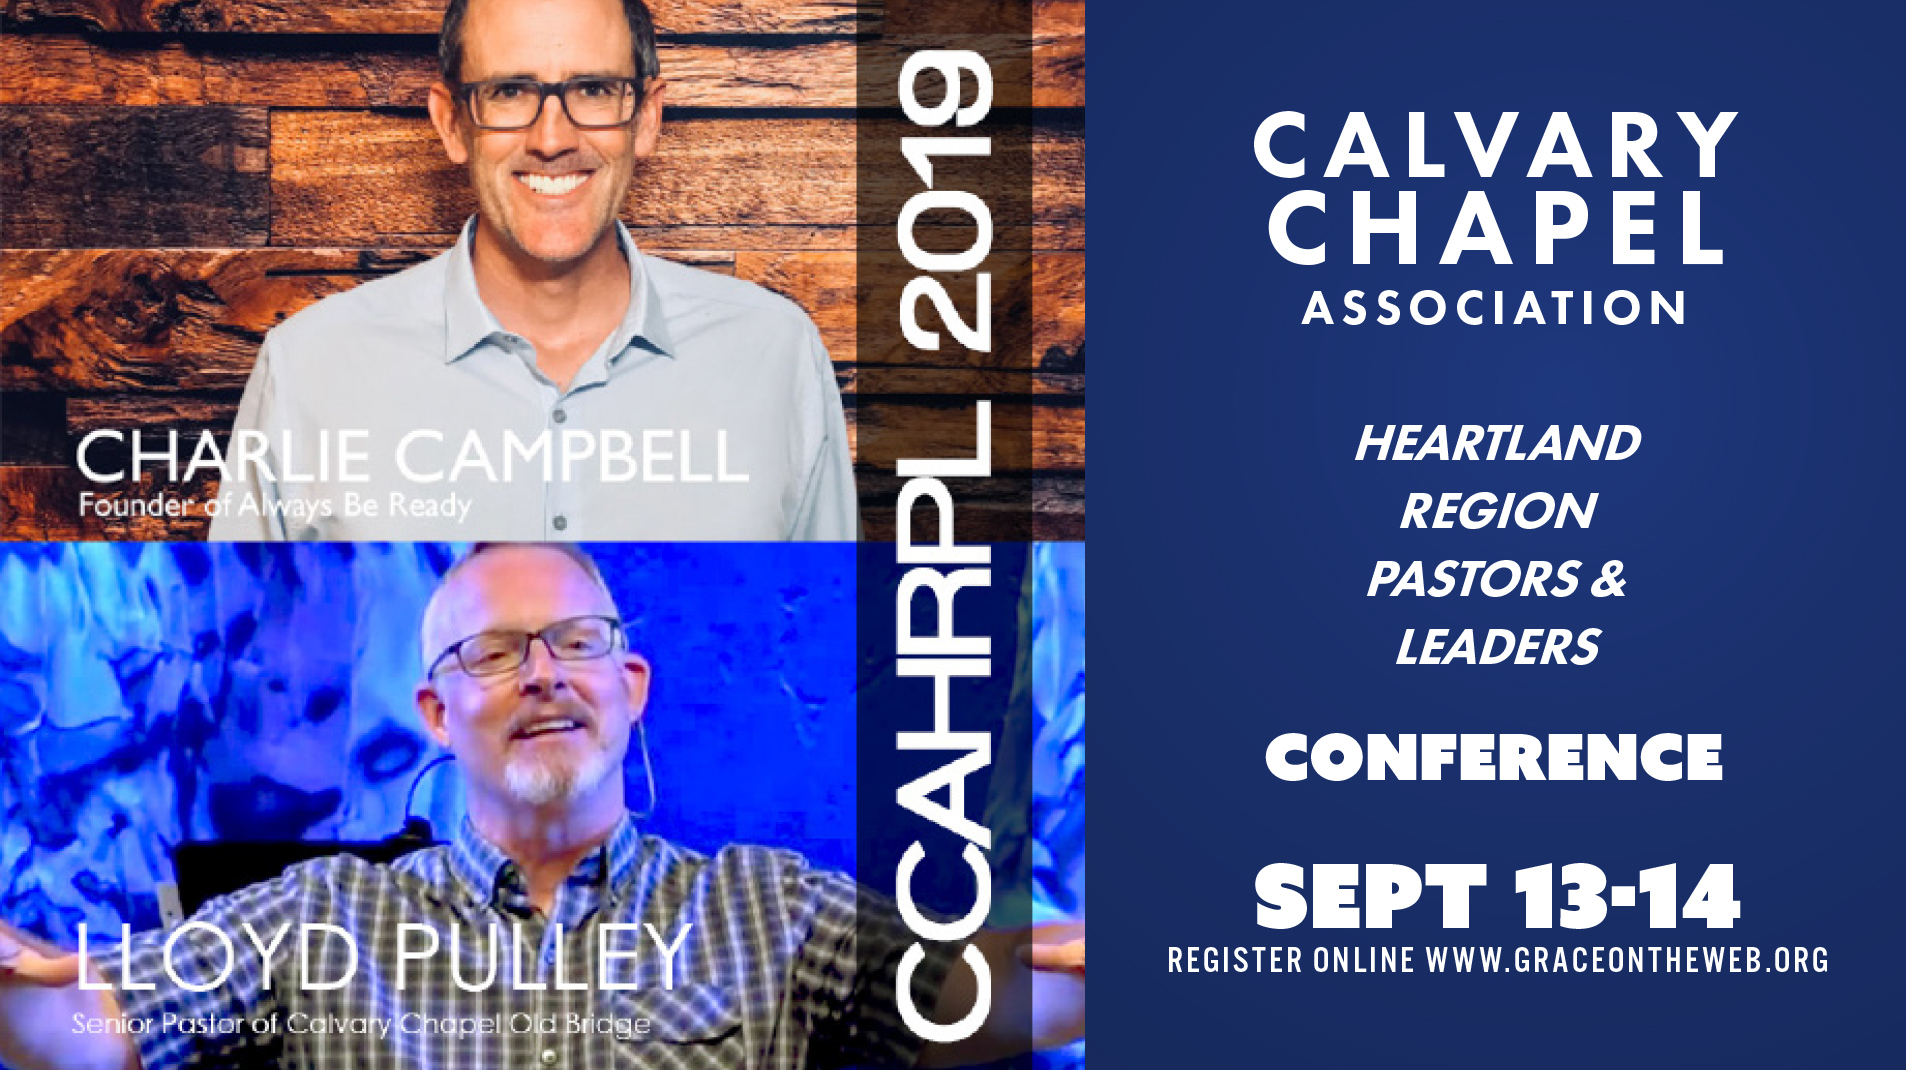 Calvary Chapel Heartland Region Pastors and Leaders Conference on